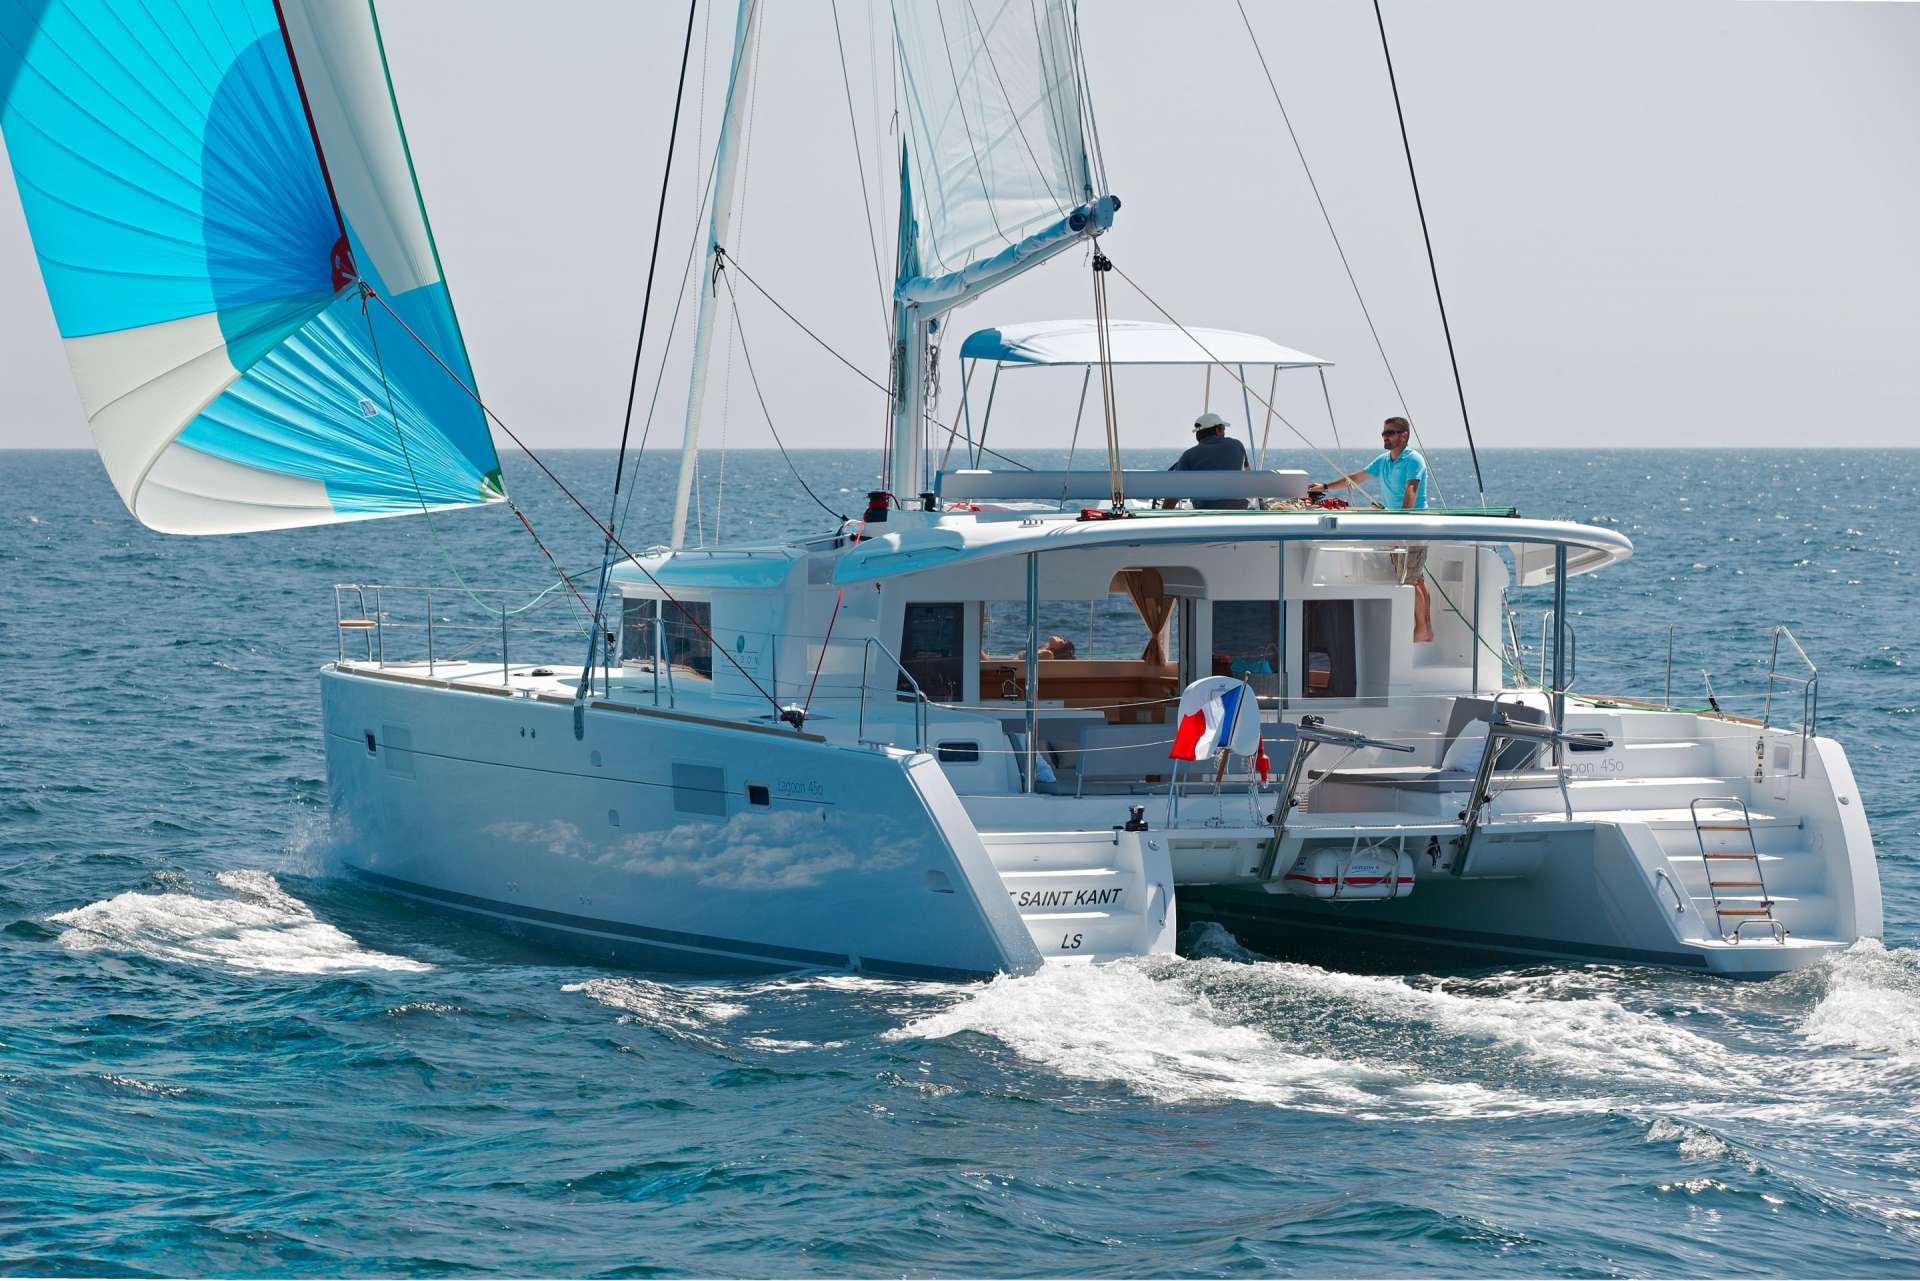 Lagoon 450 F (4 cab) - Yacht Charter Martinique & Boat hire in Martinique Le Marin Marina du Marin 1